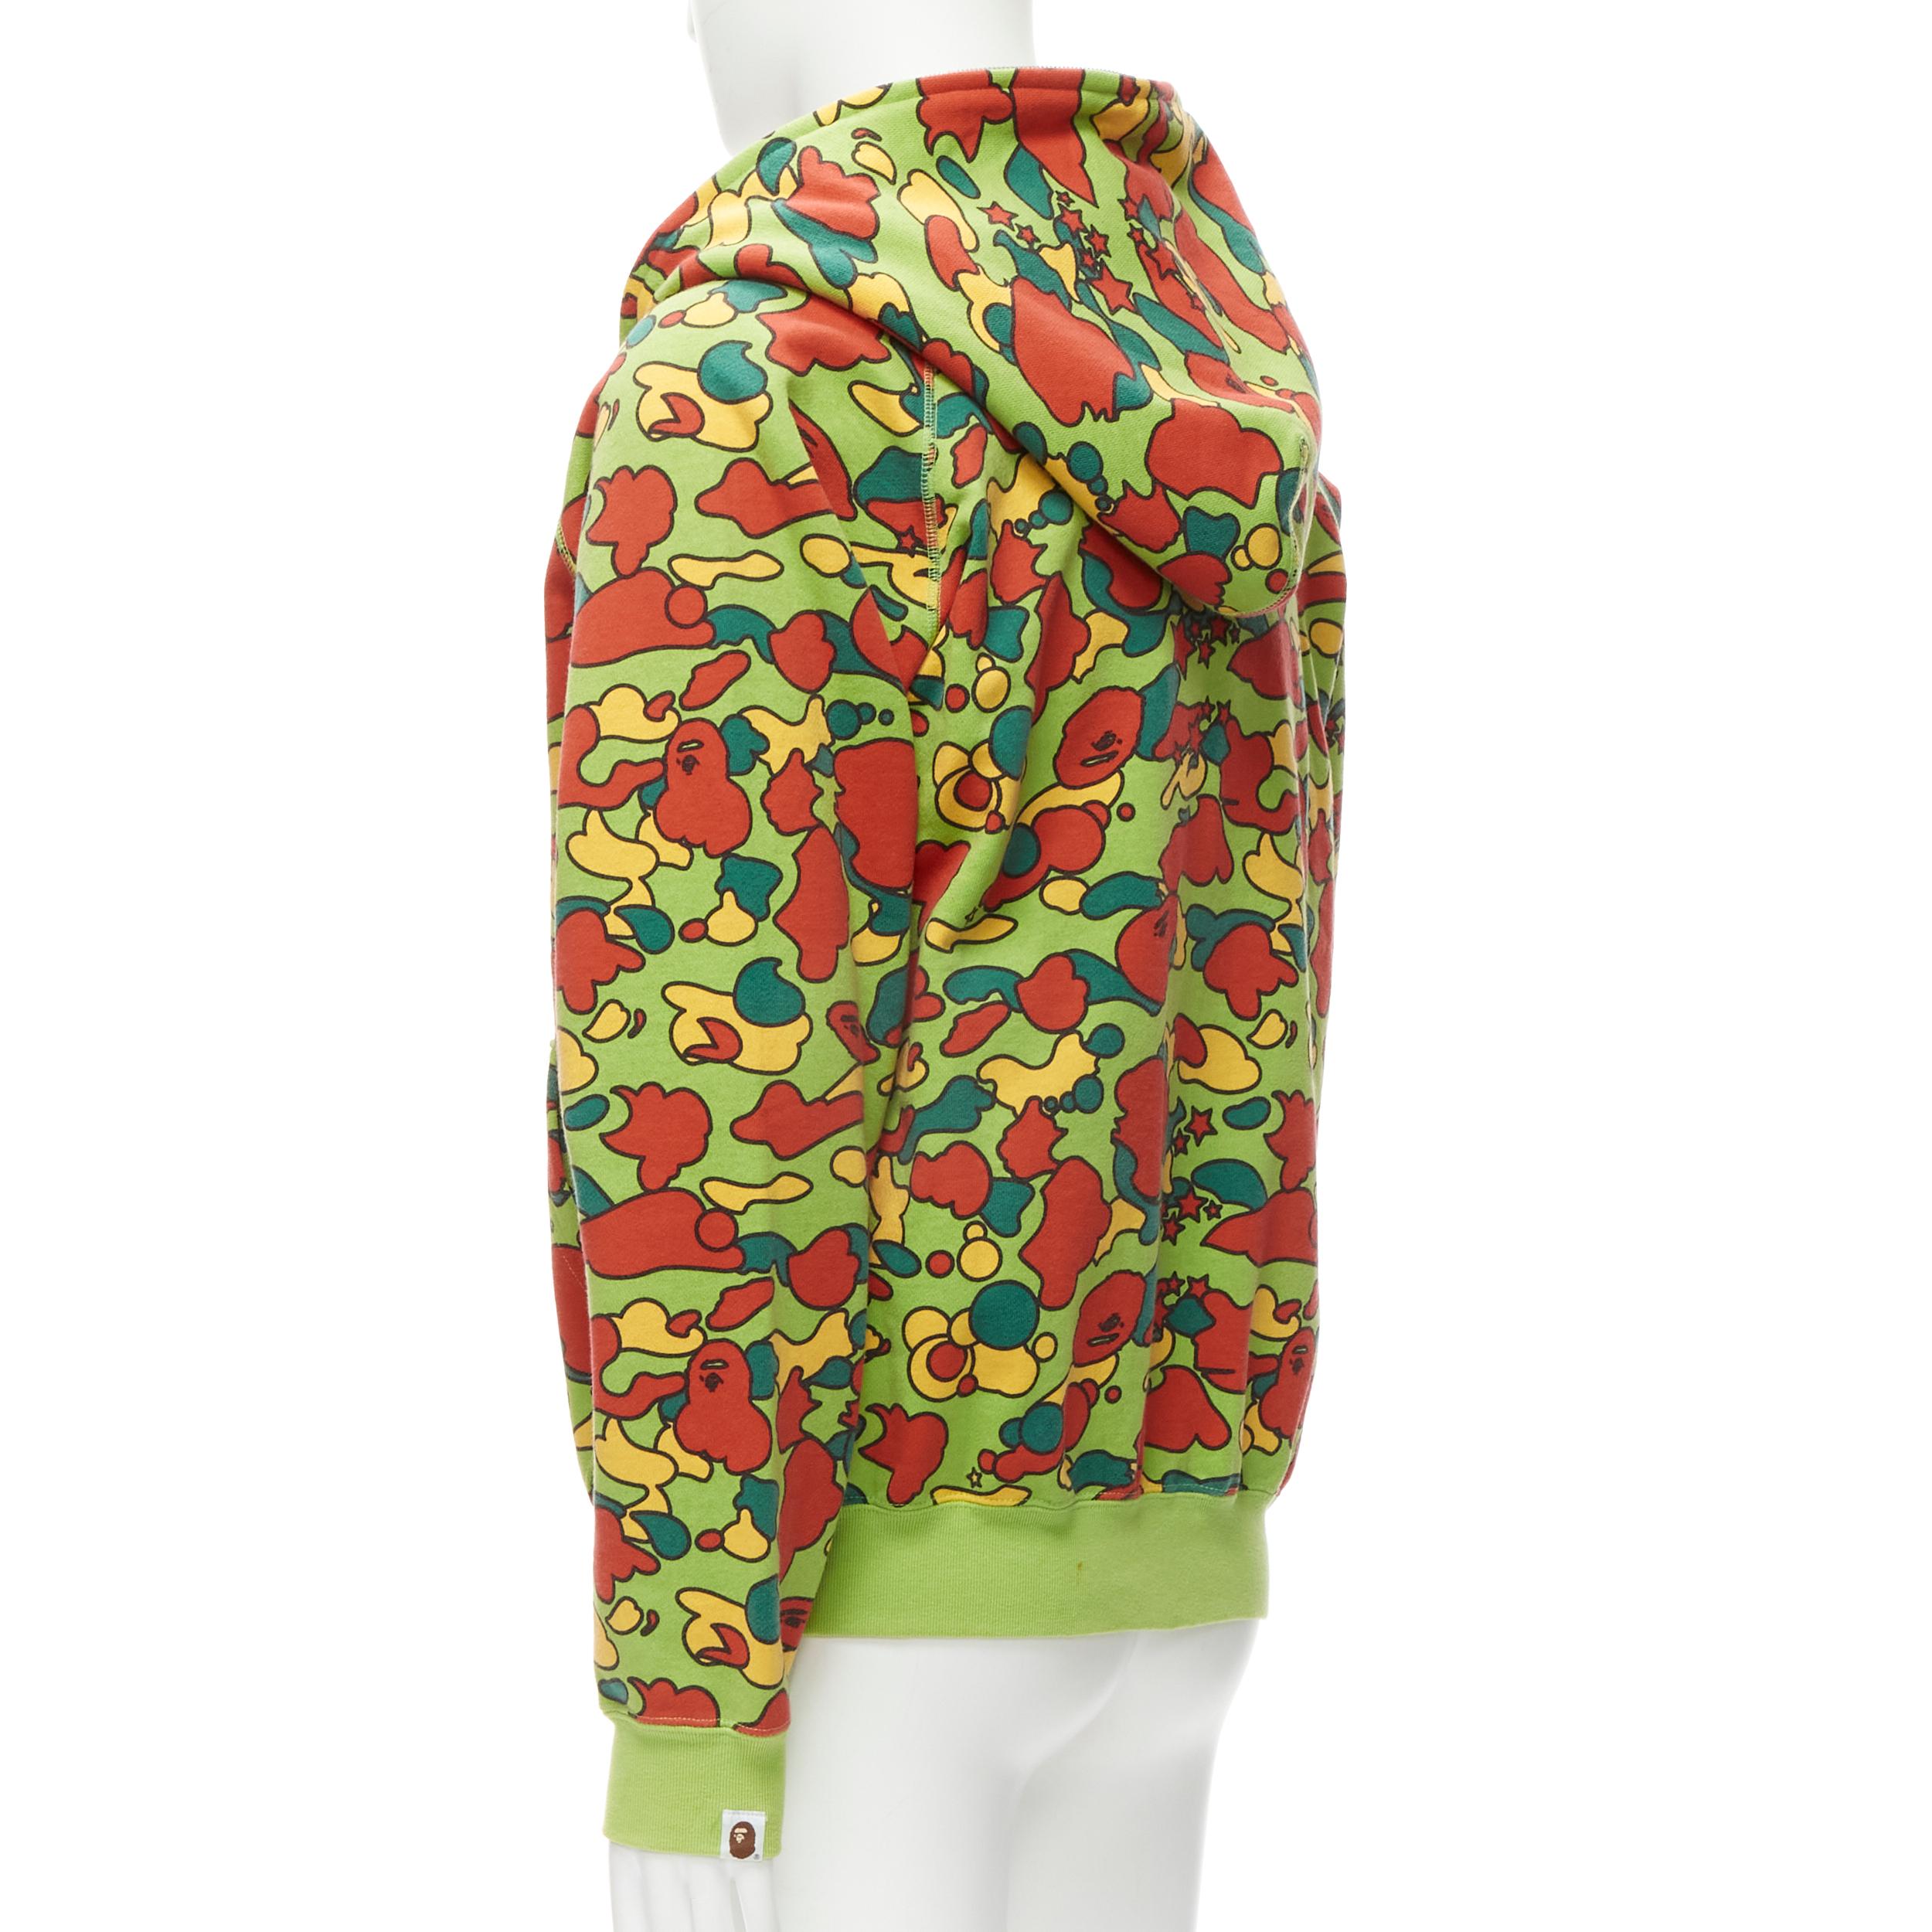 BAPE A BATHING APE Vintage green red yellow camo zip up hoodie M 2